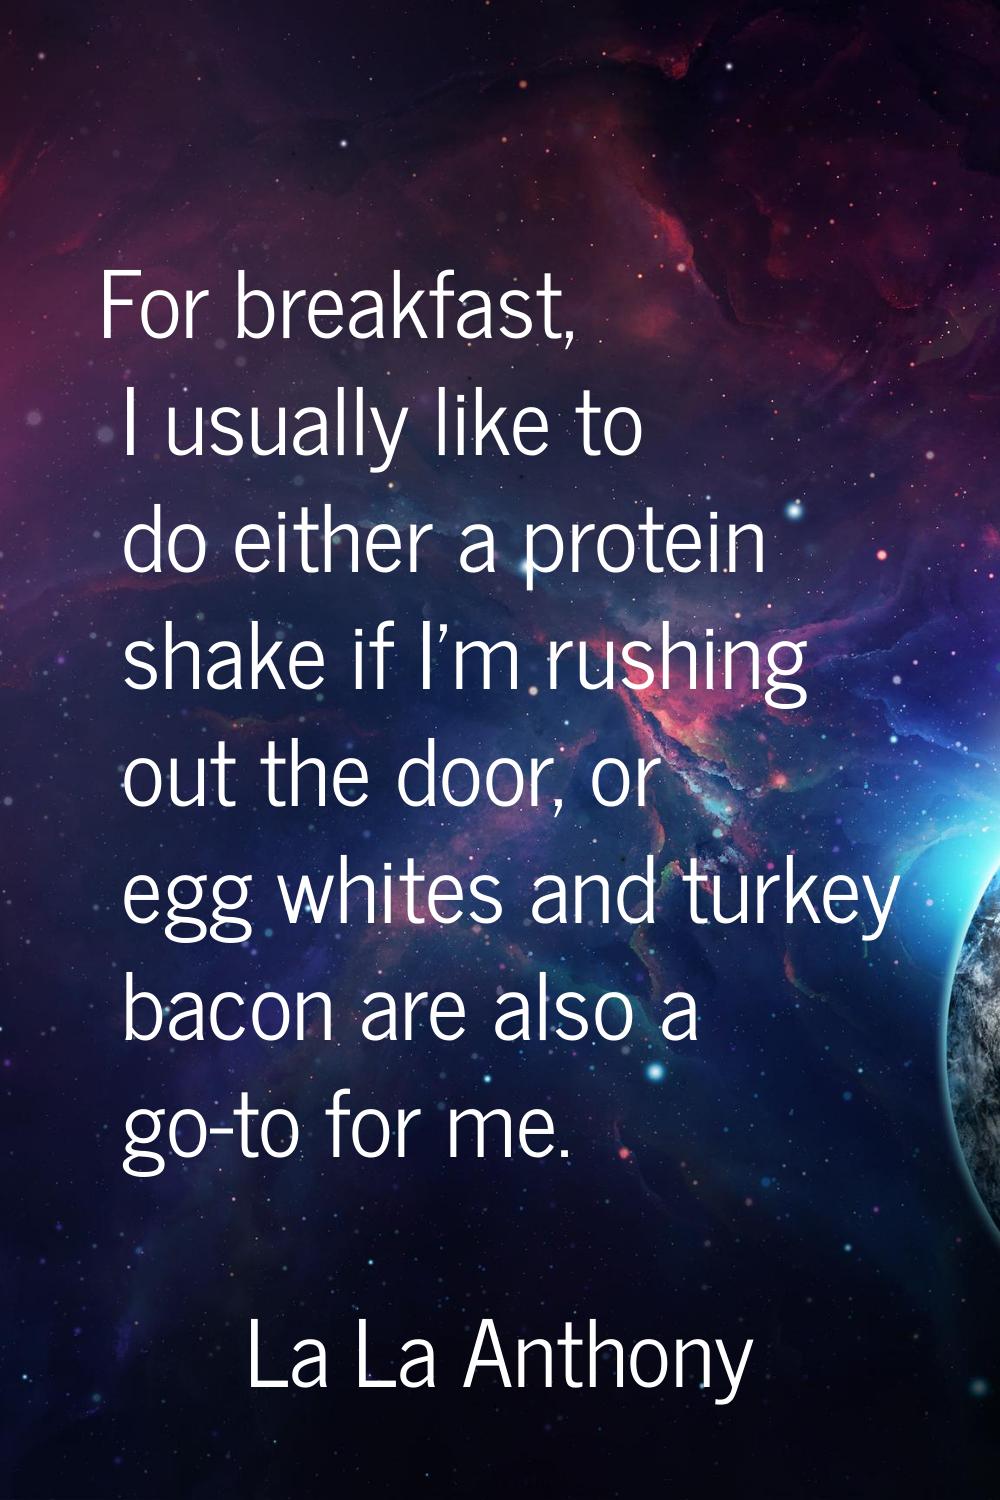 For breakfast, I usually like to do either a protein shake if I'm rushing out the door, or egg whit